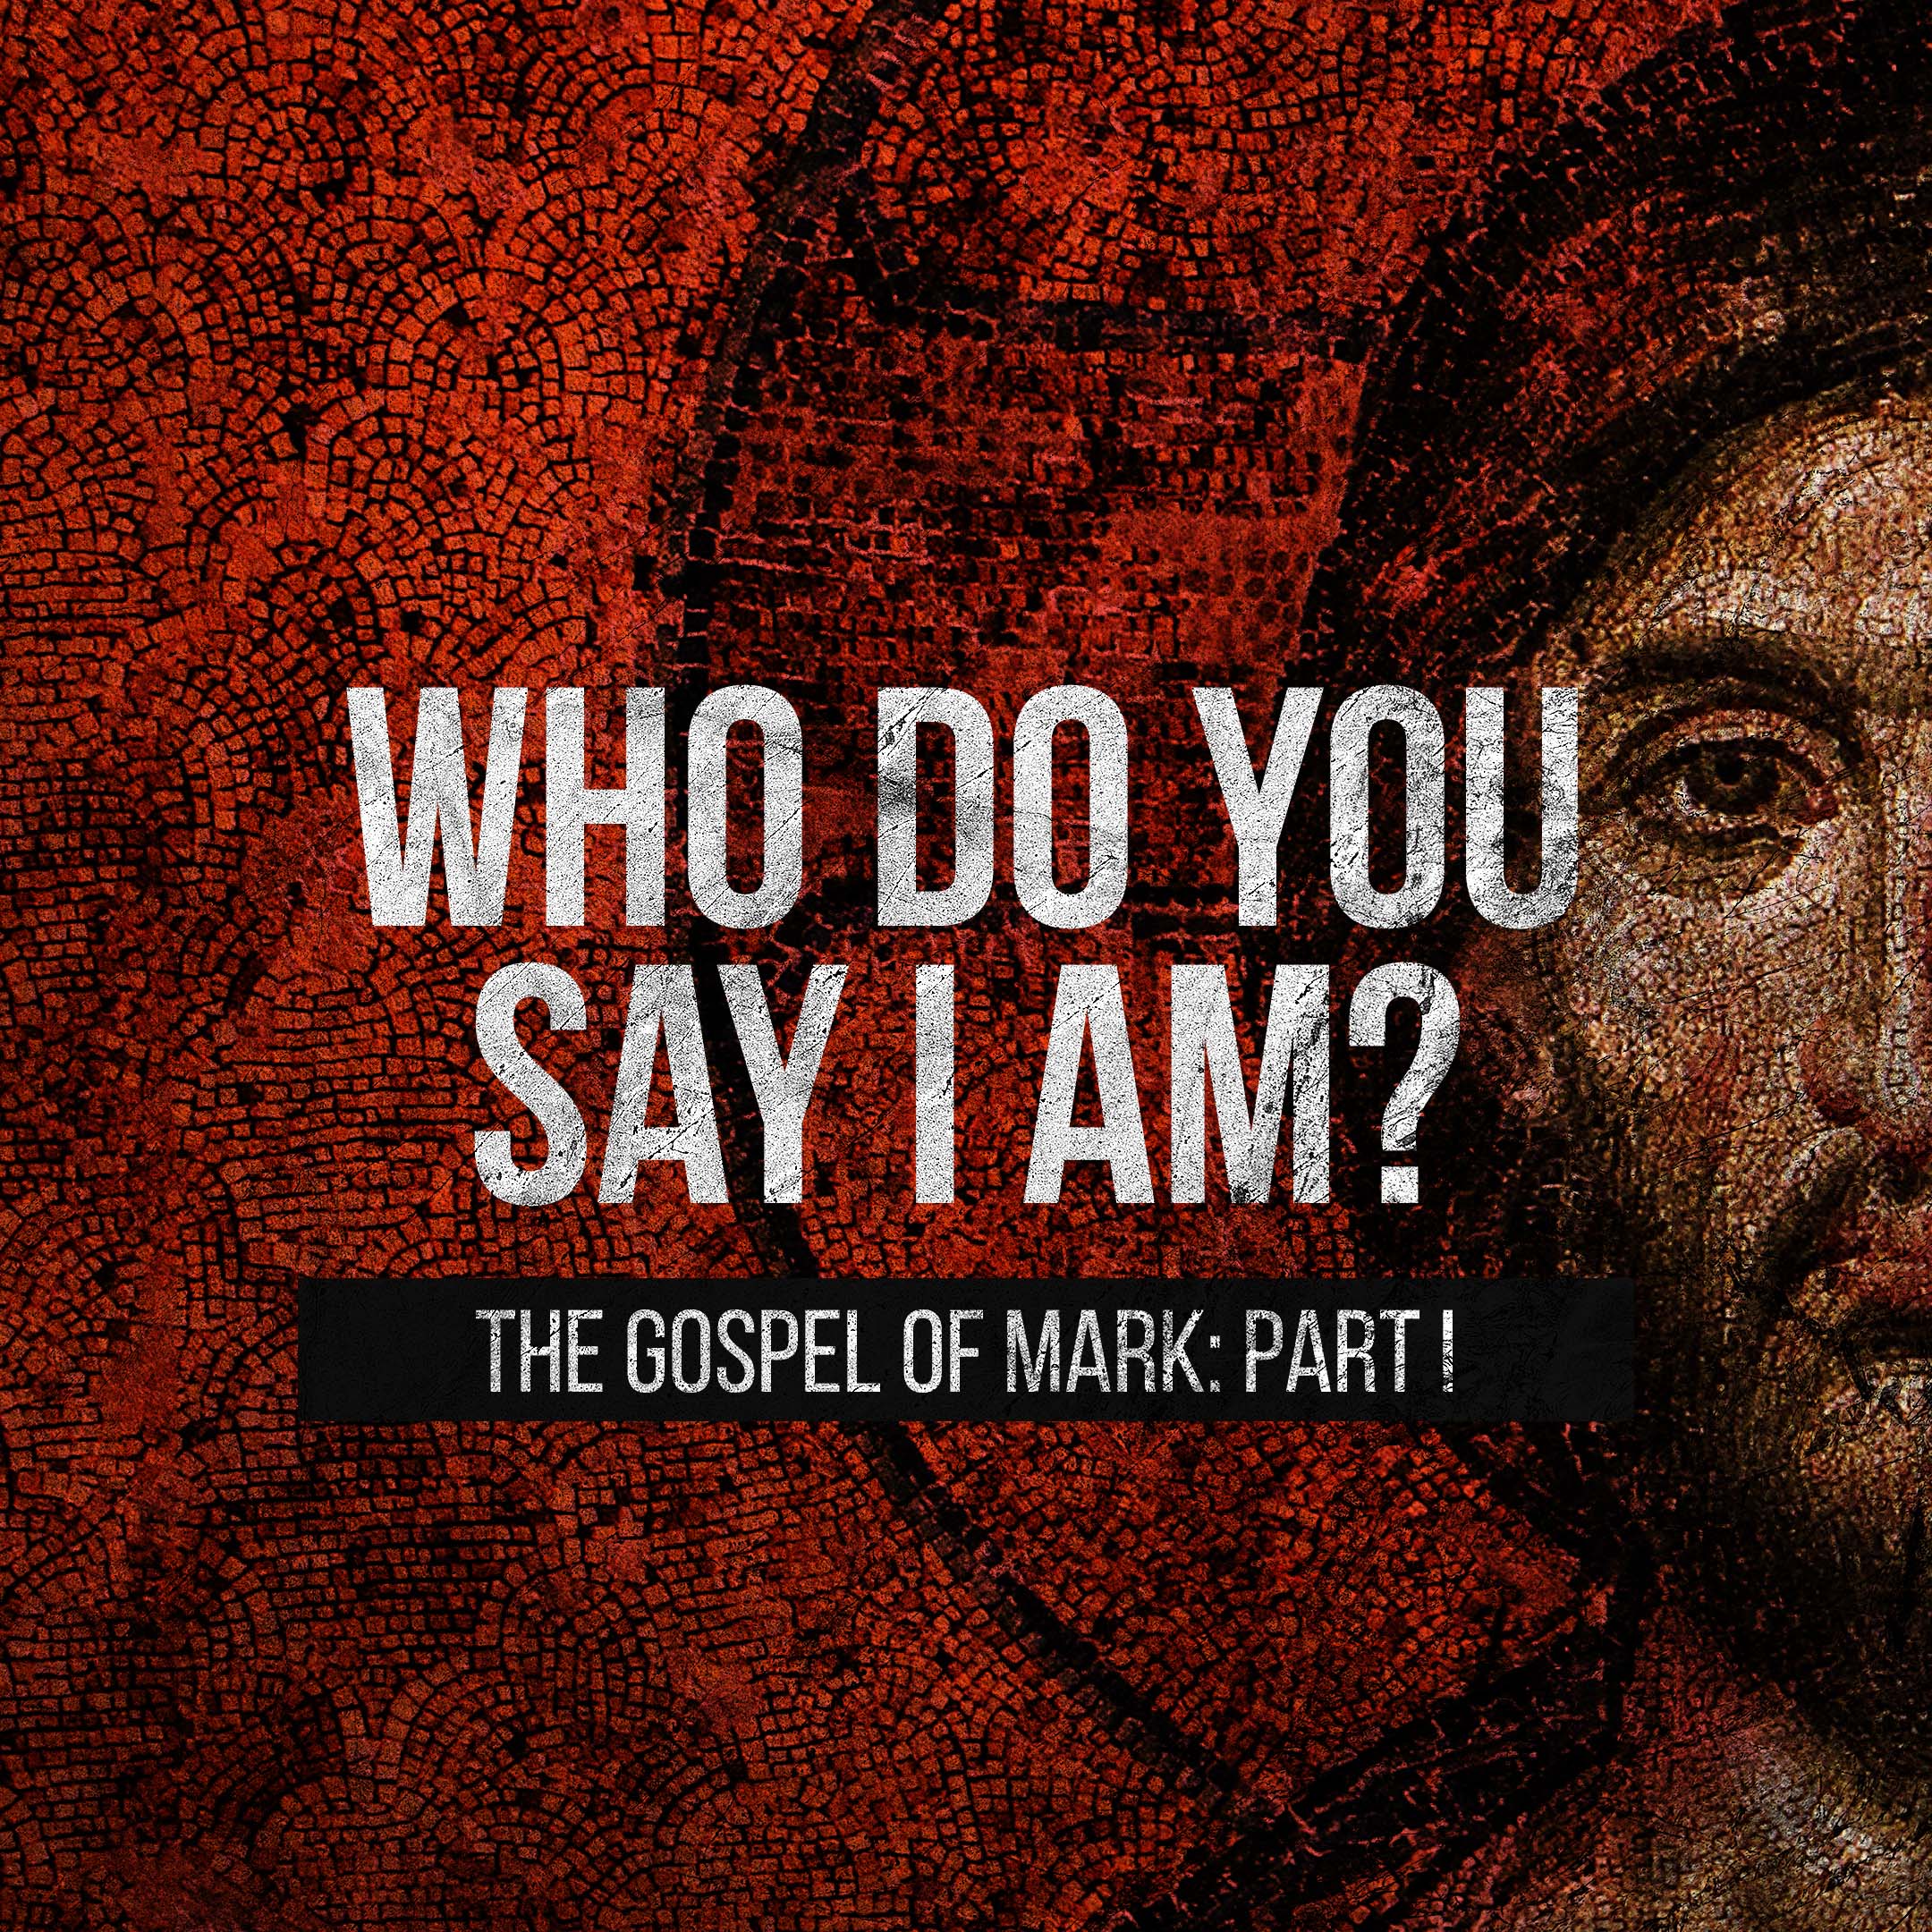 The Book of Mark - The Power to Restore - Mark 2:1-12